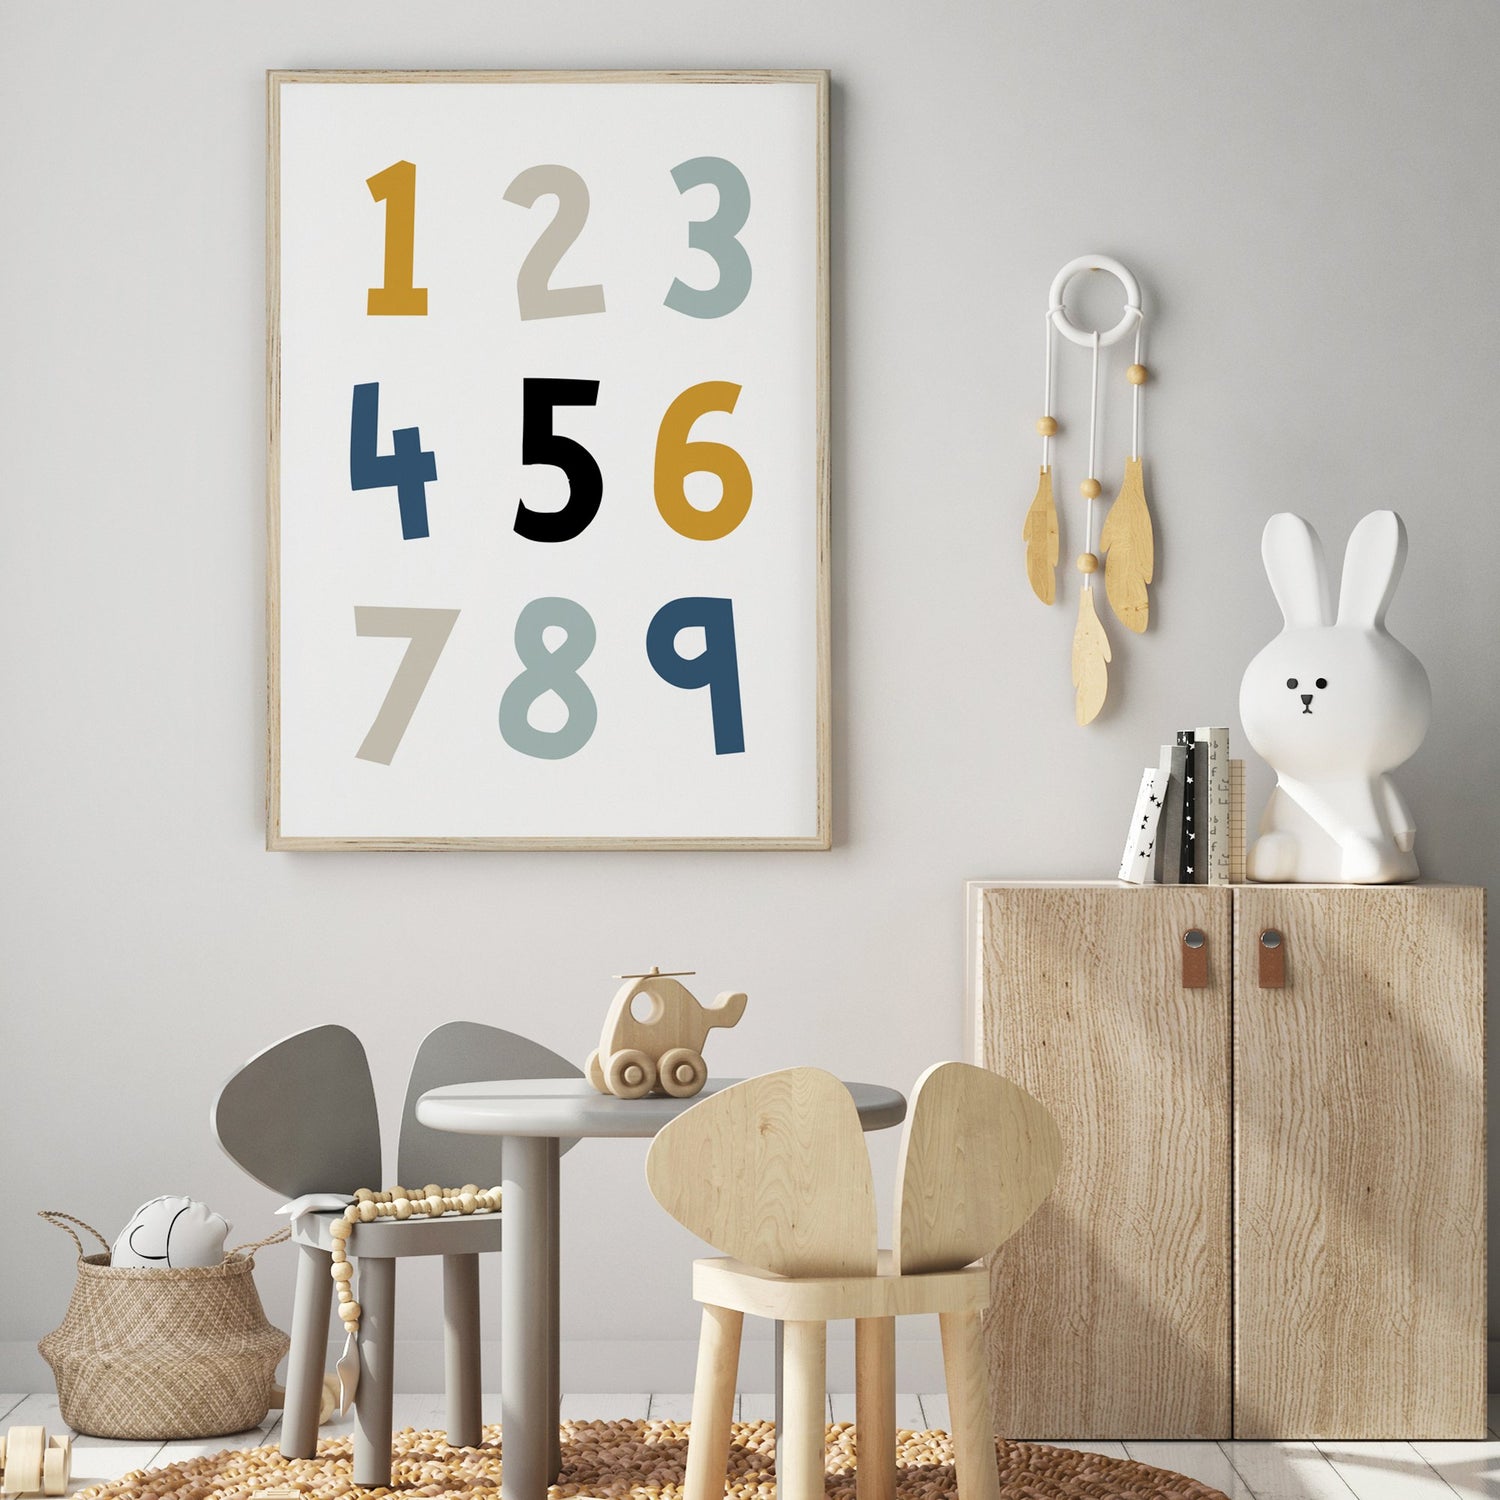 Construction Numbers Print